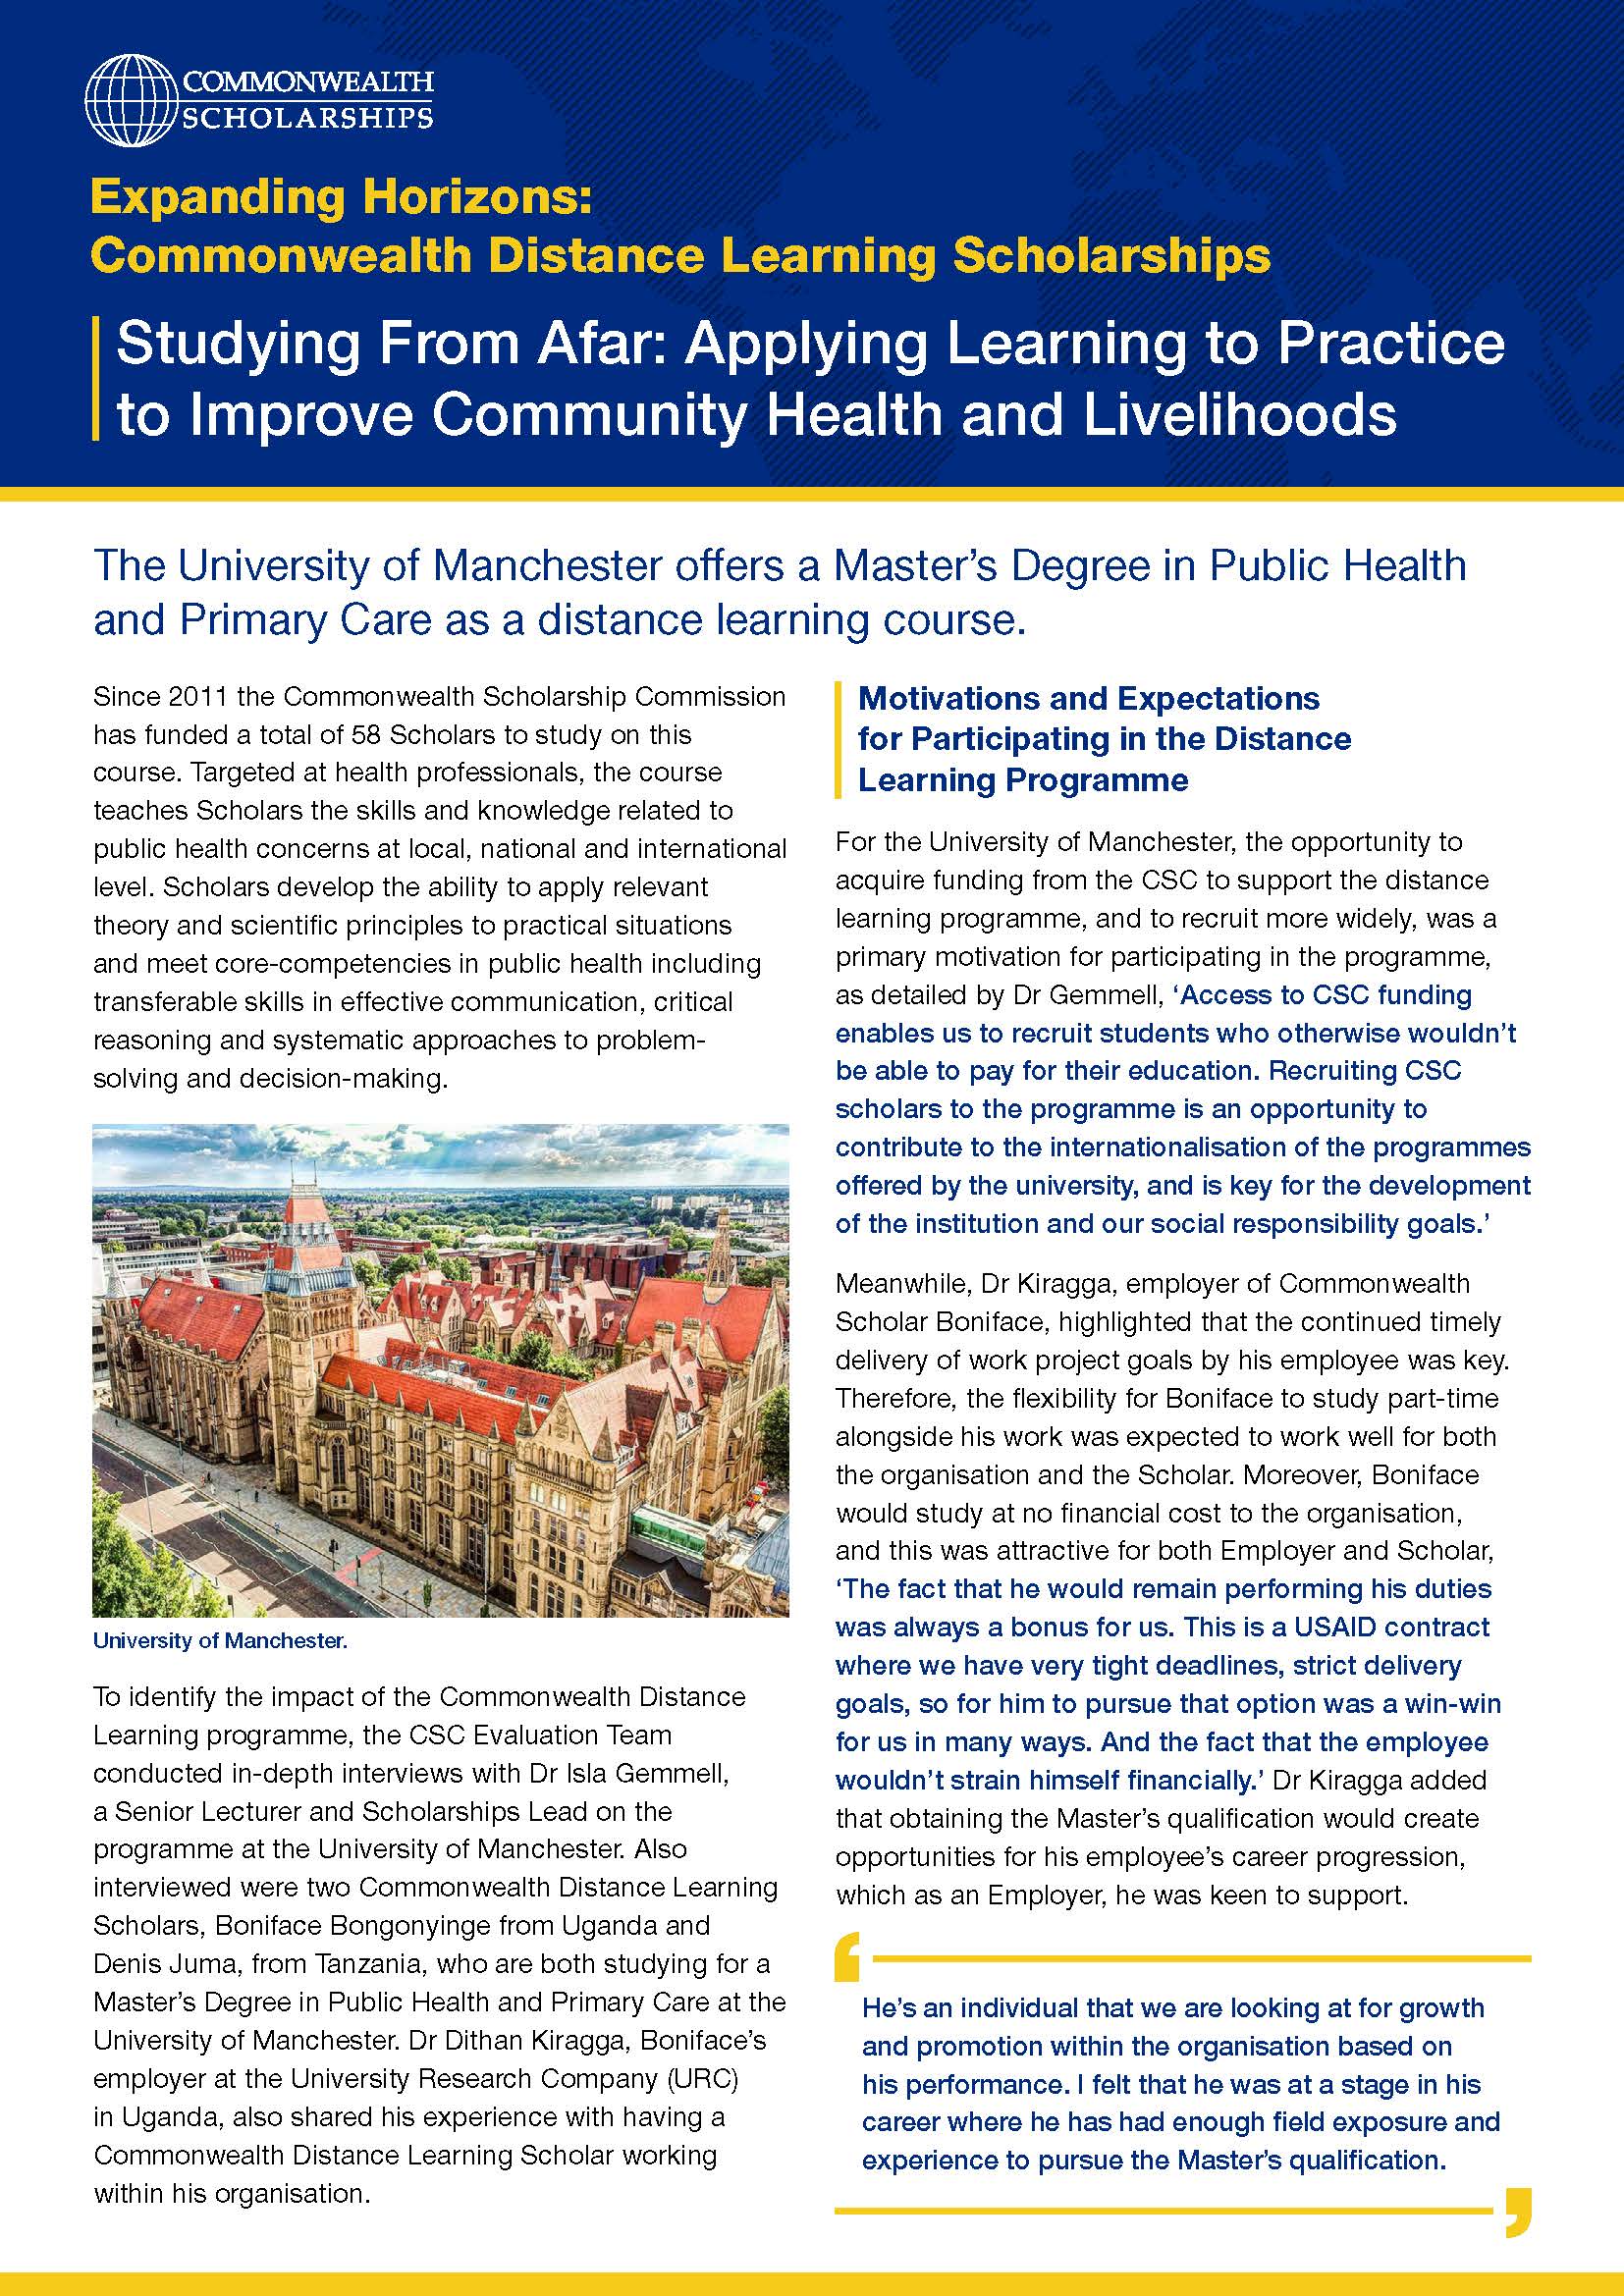 Studying From Afar: Applying Learning to Practice to Improve Community Health and Livelihoods case study